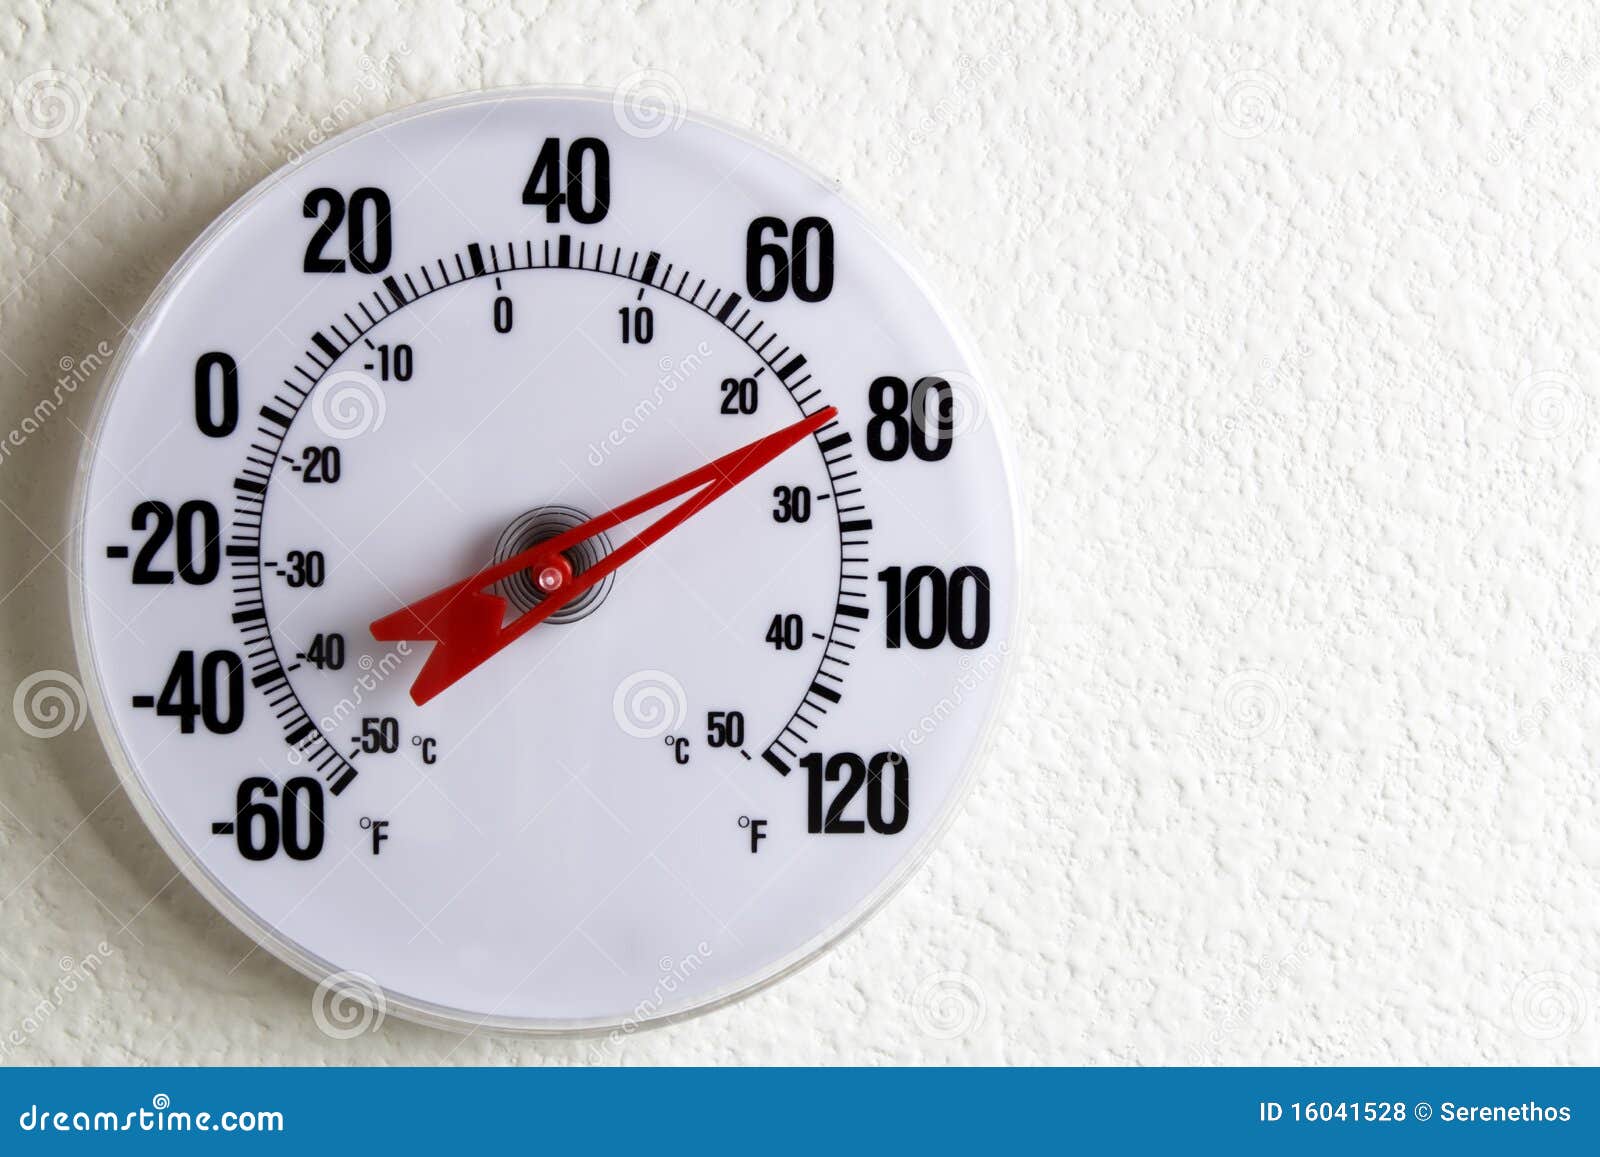 https://thumbs.dreamstime.com/z/round-thermometer-wall-16041528.jpg